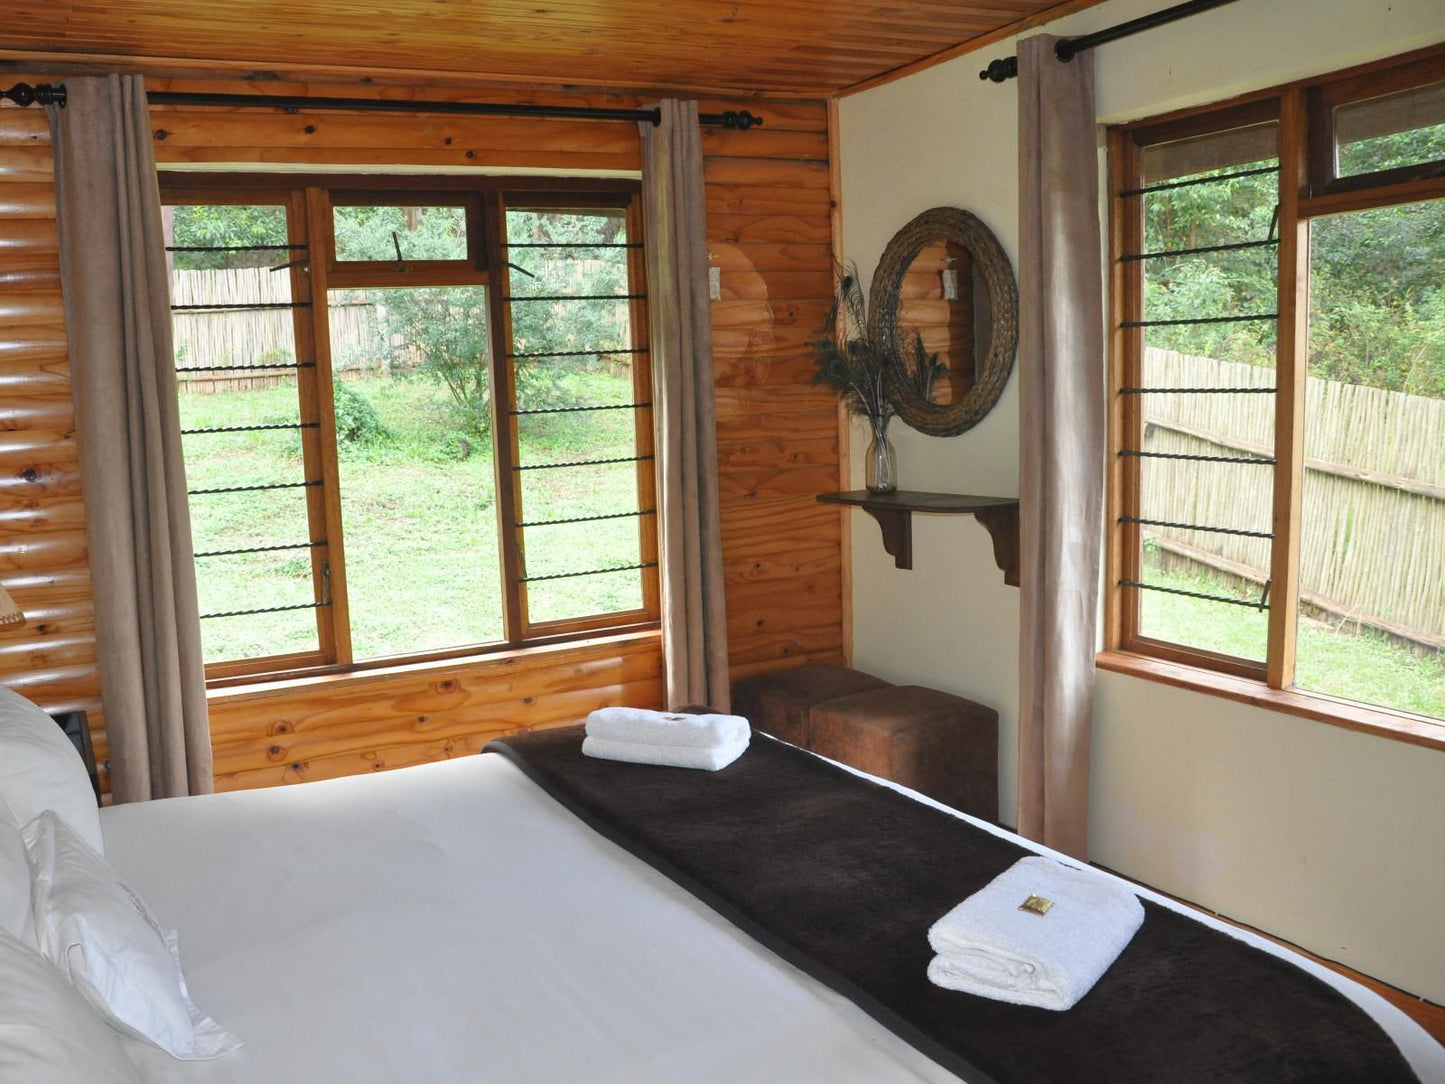 Gunyatoo Trout Farm And Guest Lodge Sabie Mpumalanga South Africa Cabin, Building, Architecture, Bedroom